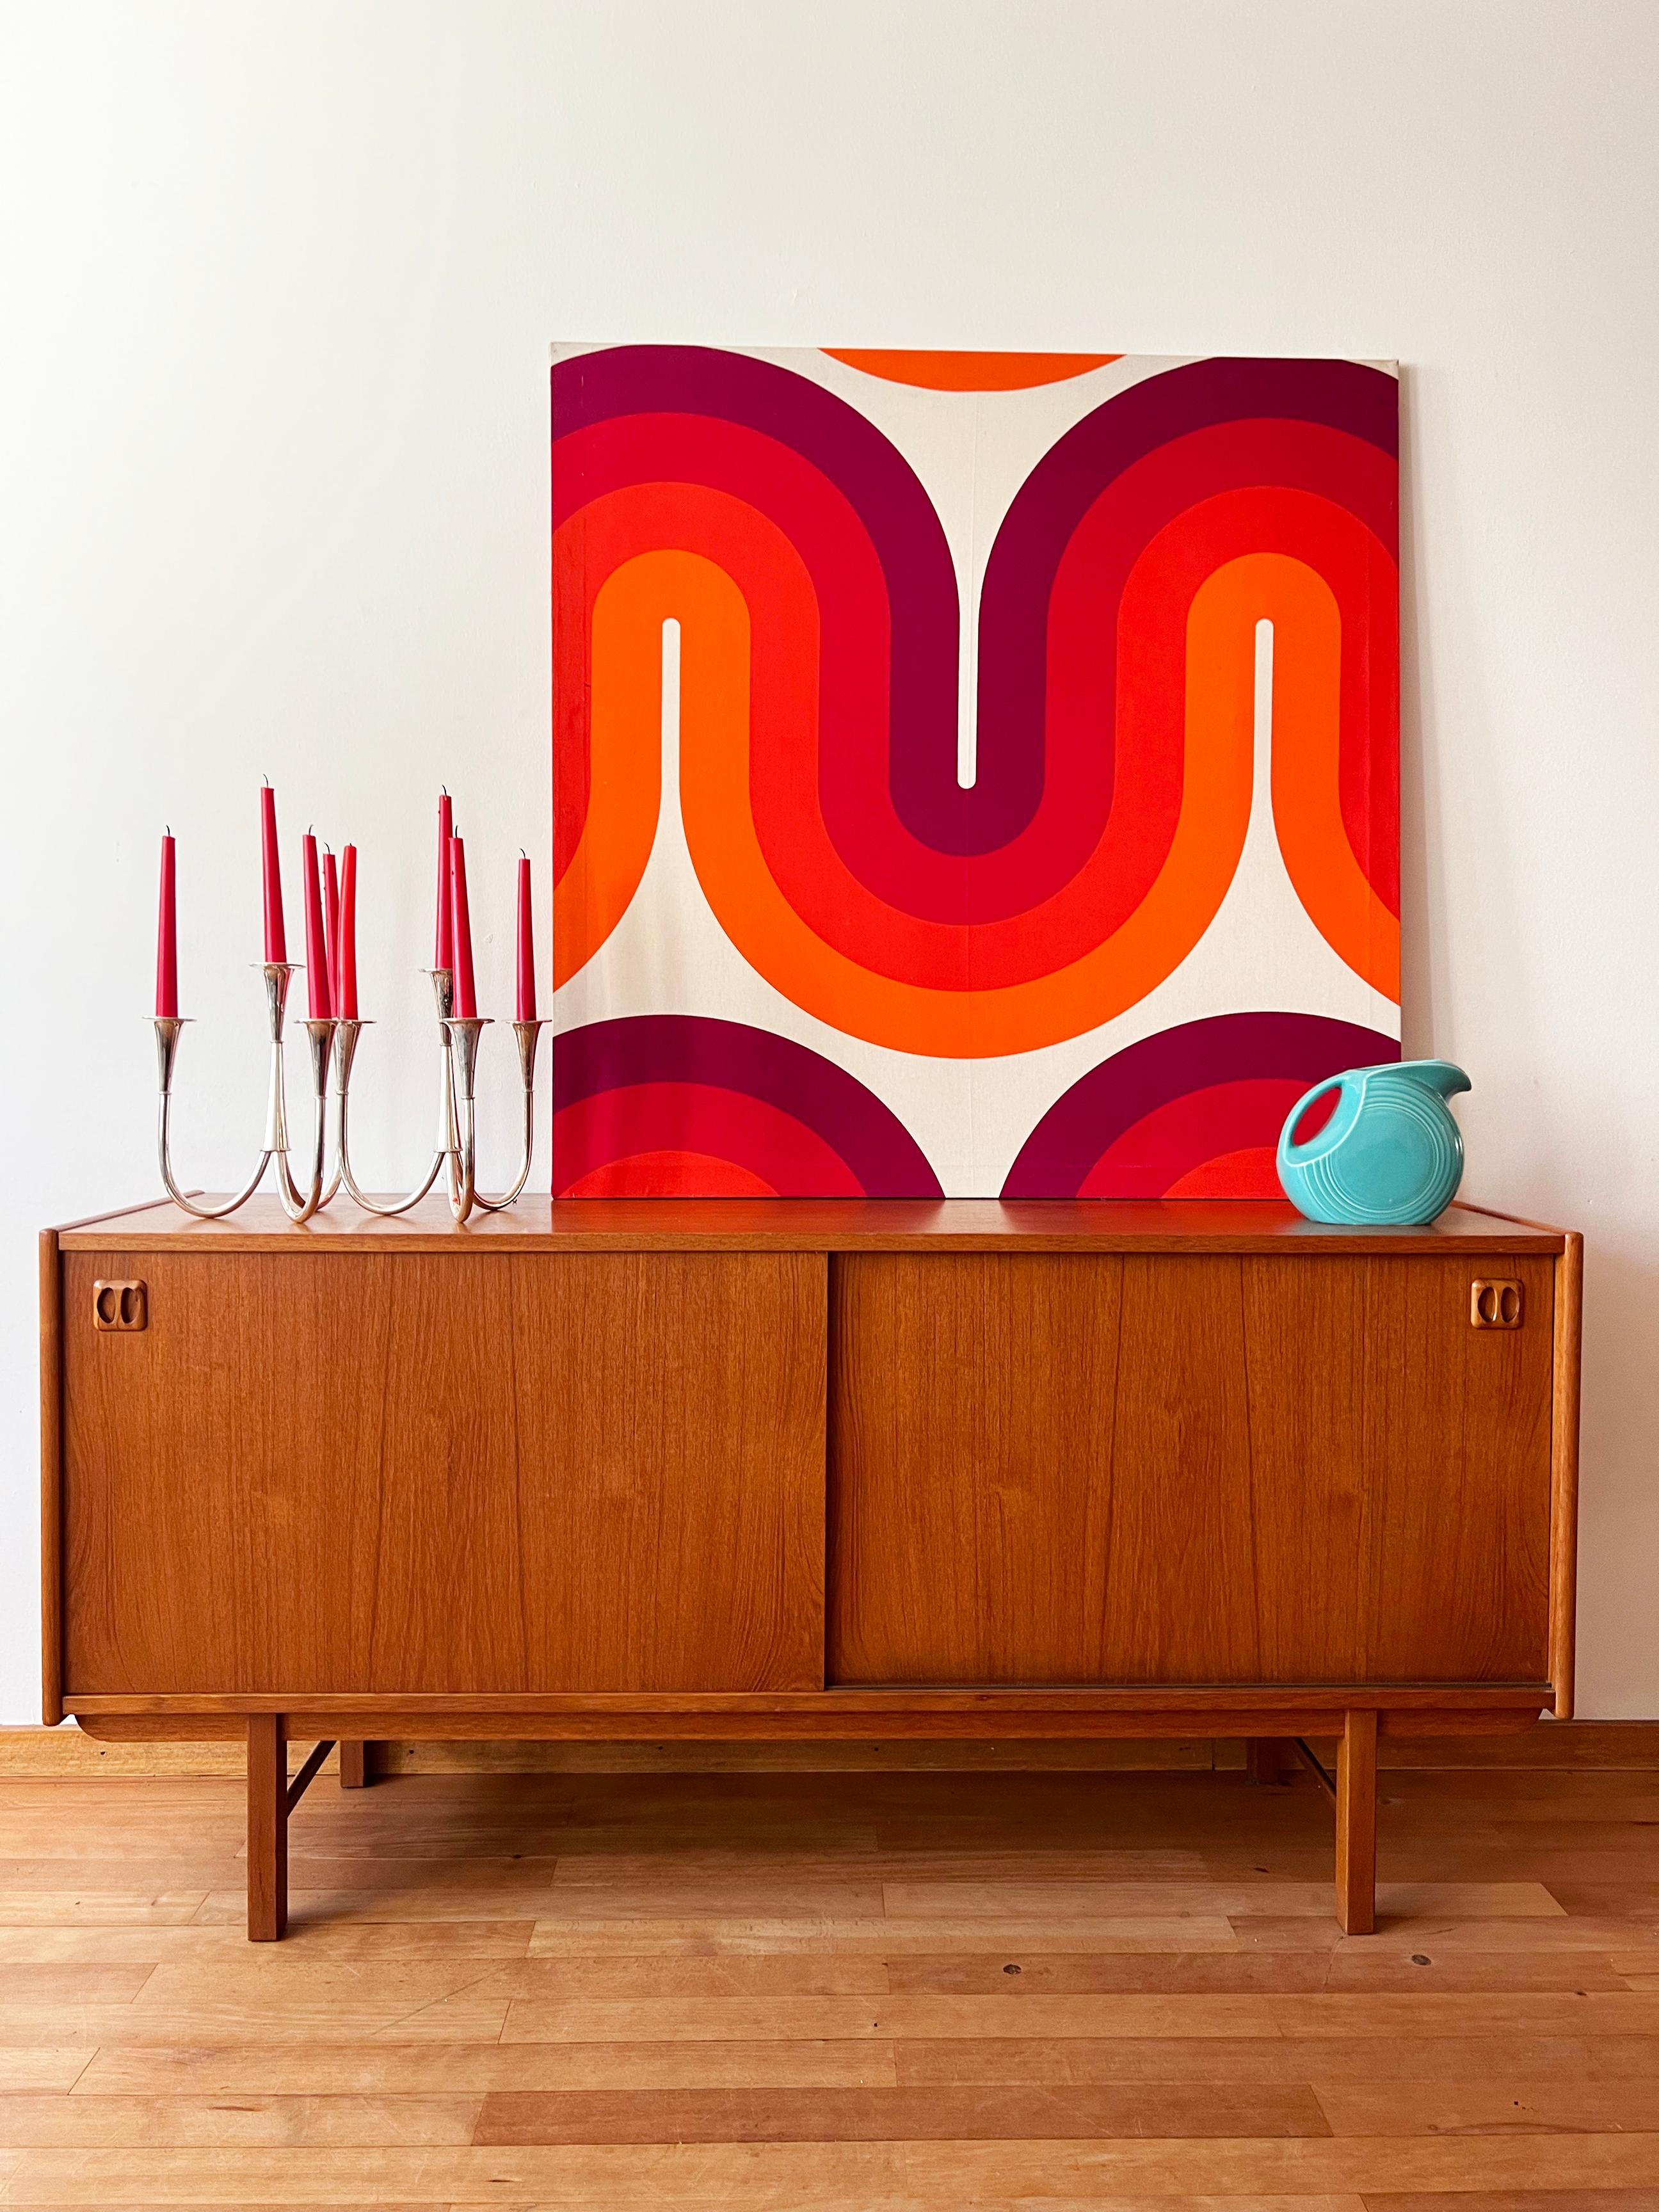 Fantastic, minimalist Original Danish Teak Mid Century Credenza piece that is just the perfect size for a Dining room, living room for a TV, or a bedroom. This piece works everywhere.  It is timeless and beautiful.

One cabinet with two sliding